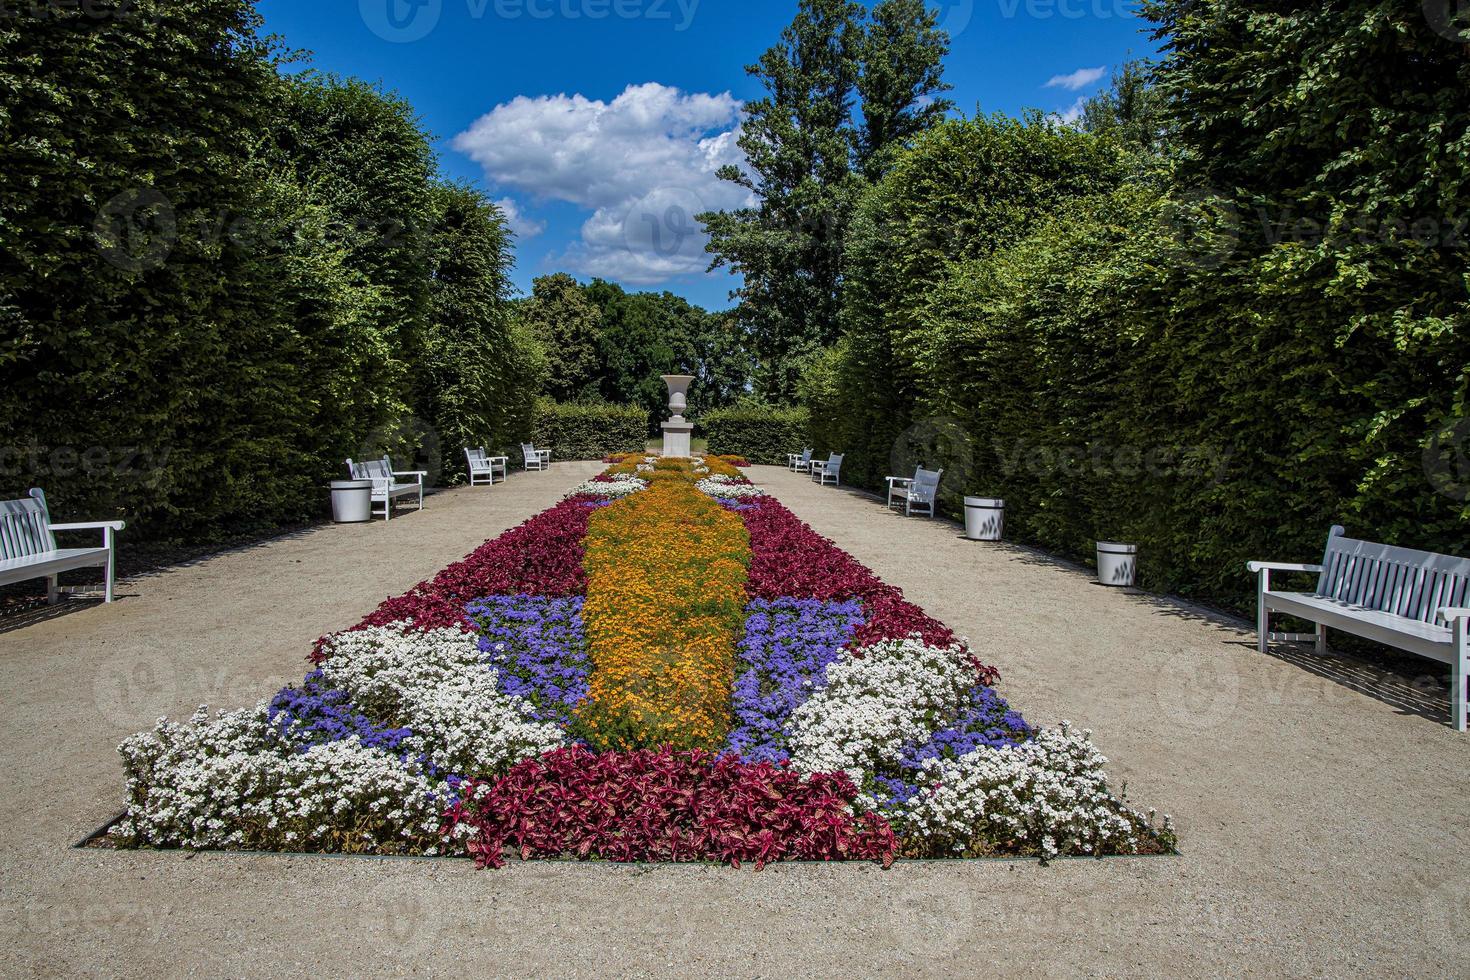 royal gardens at the castle in Warsaw in Poland on a warm summer day landscape photo